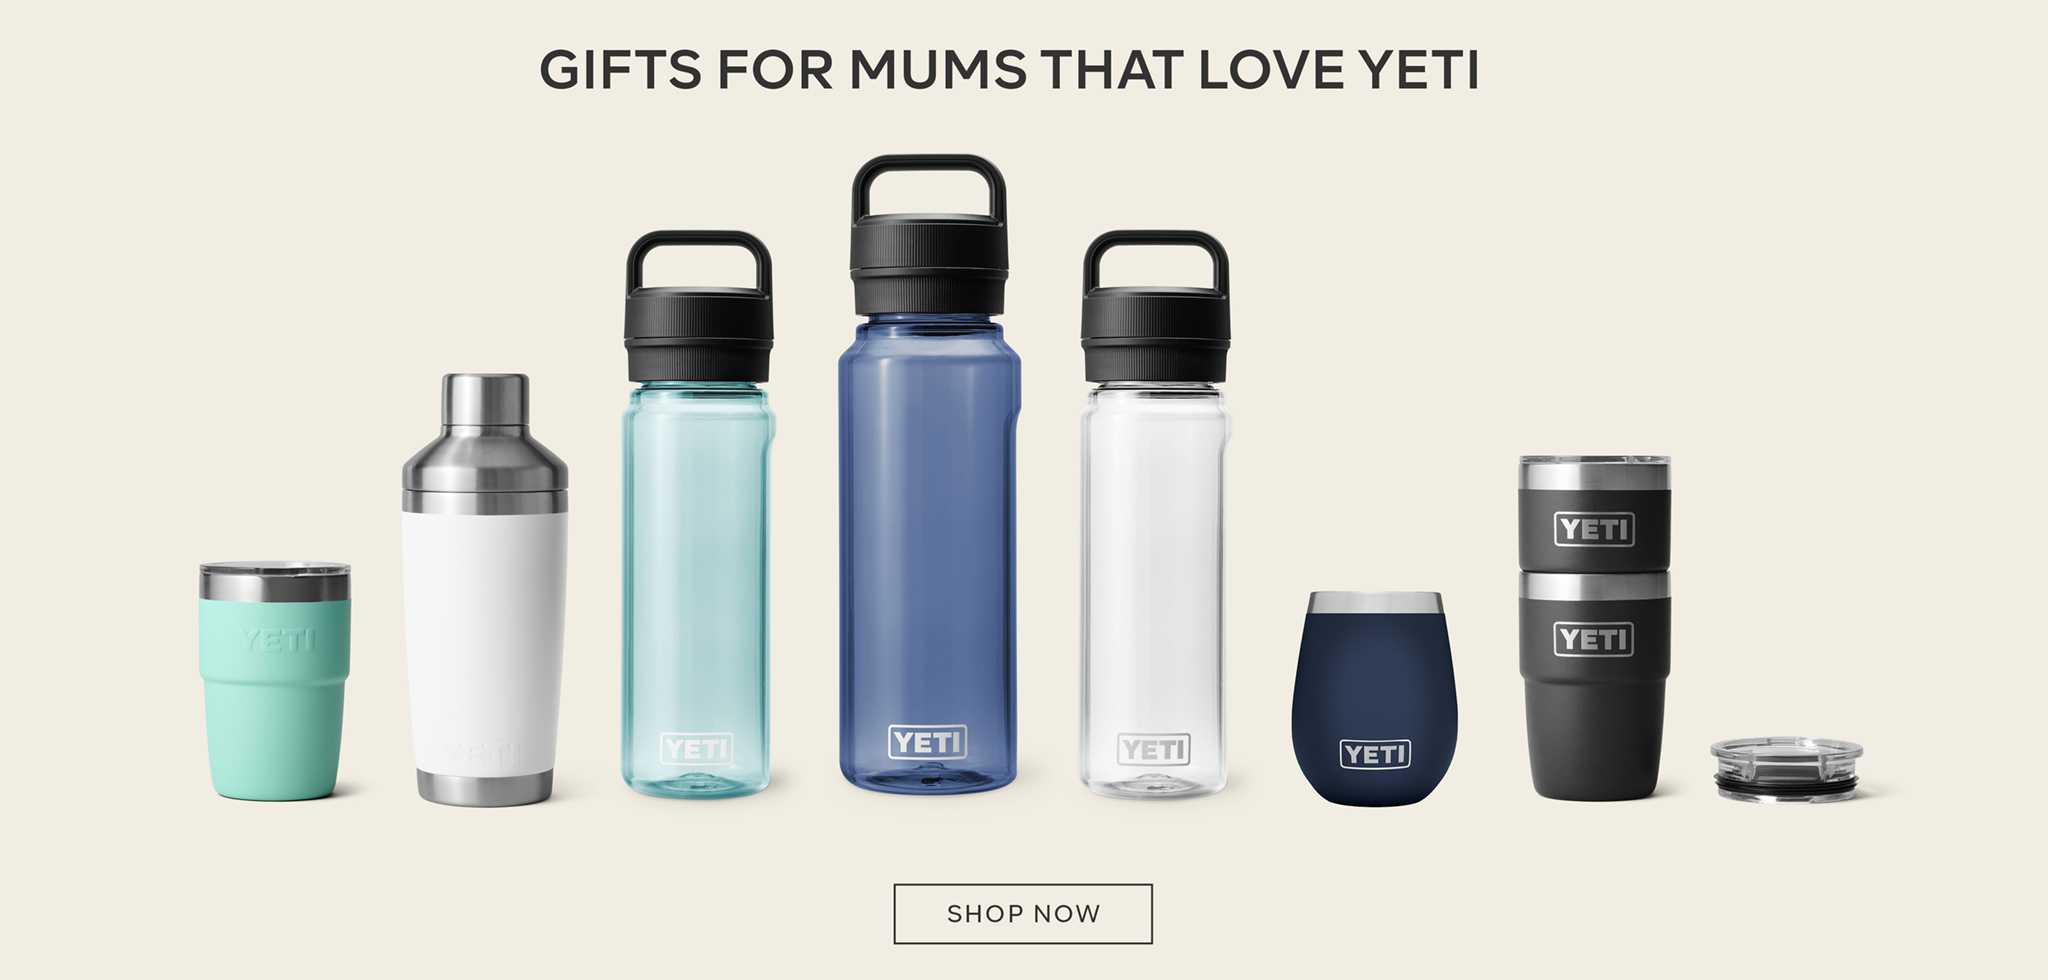 GIFTS FOR MUMS THAT LOVE YETI - SHOP NOW